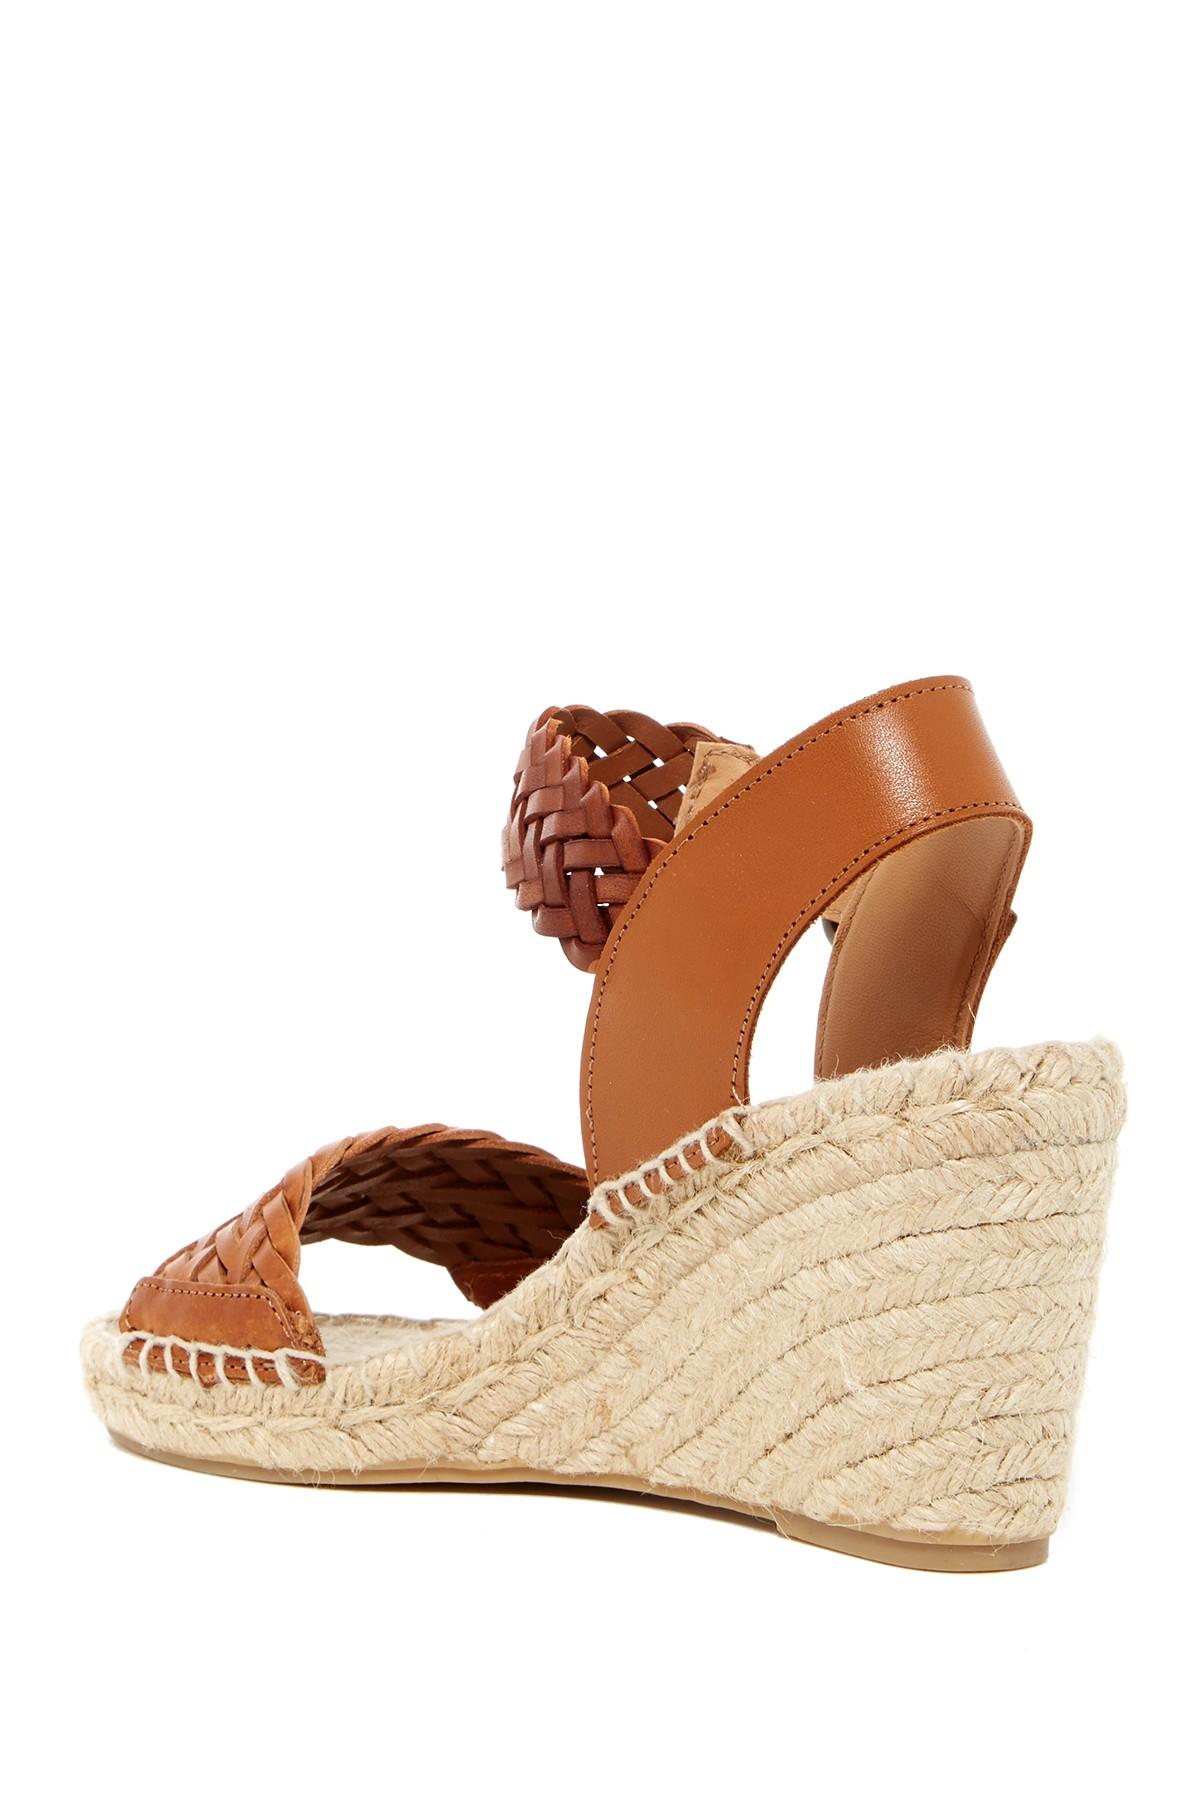 Lyst - Soludos Woven Open Toe Wedge Sandal in Brown